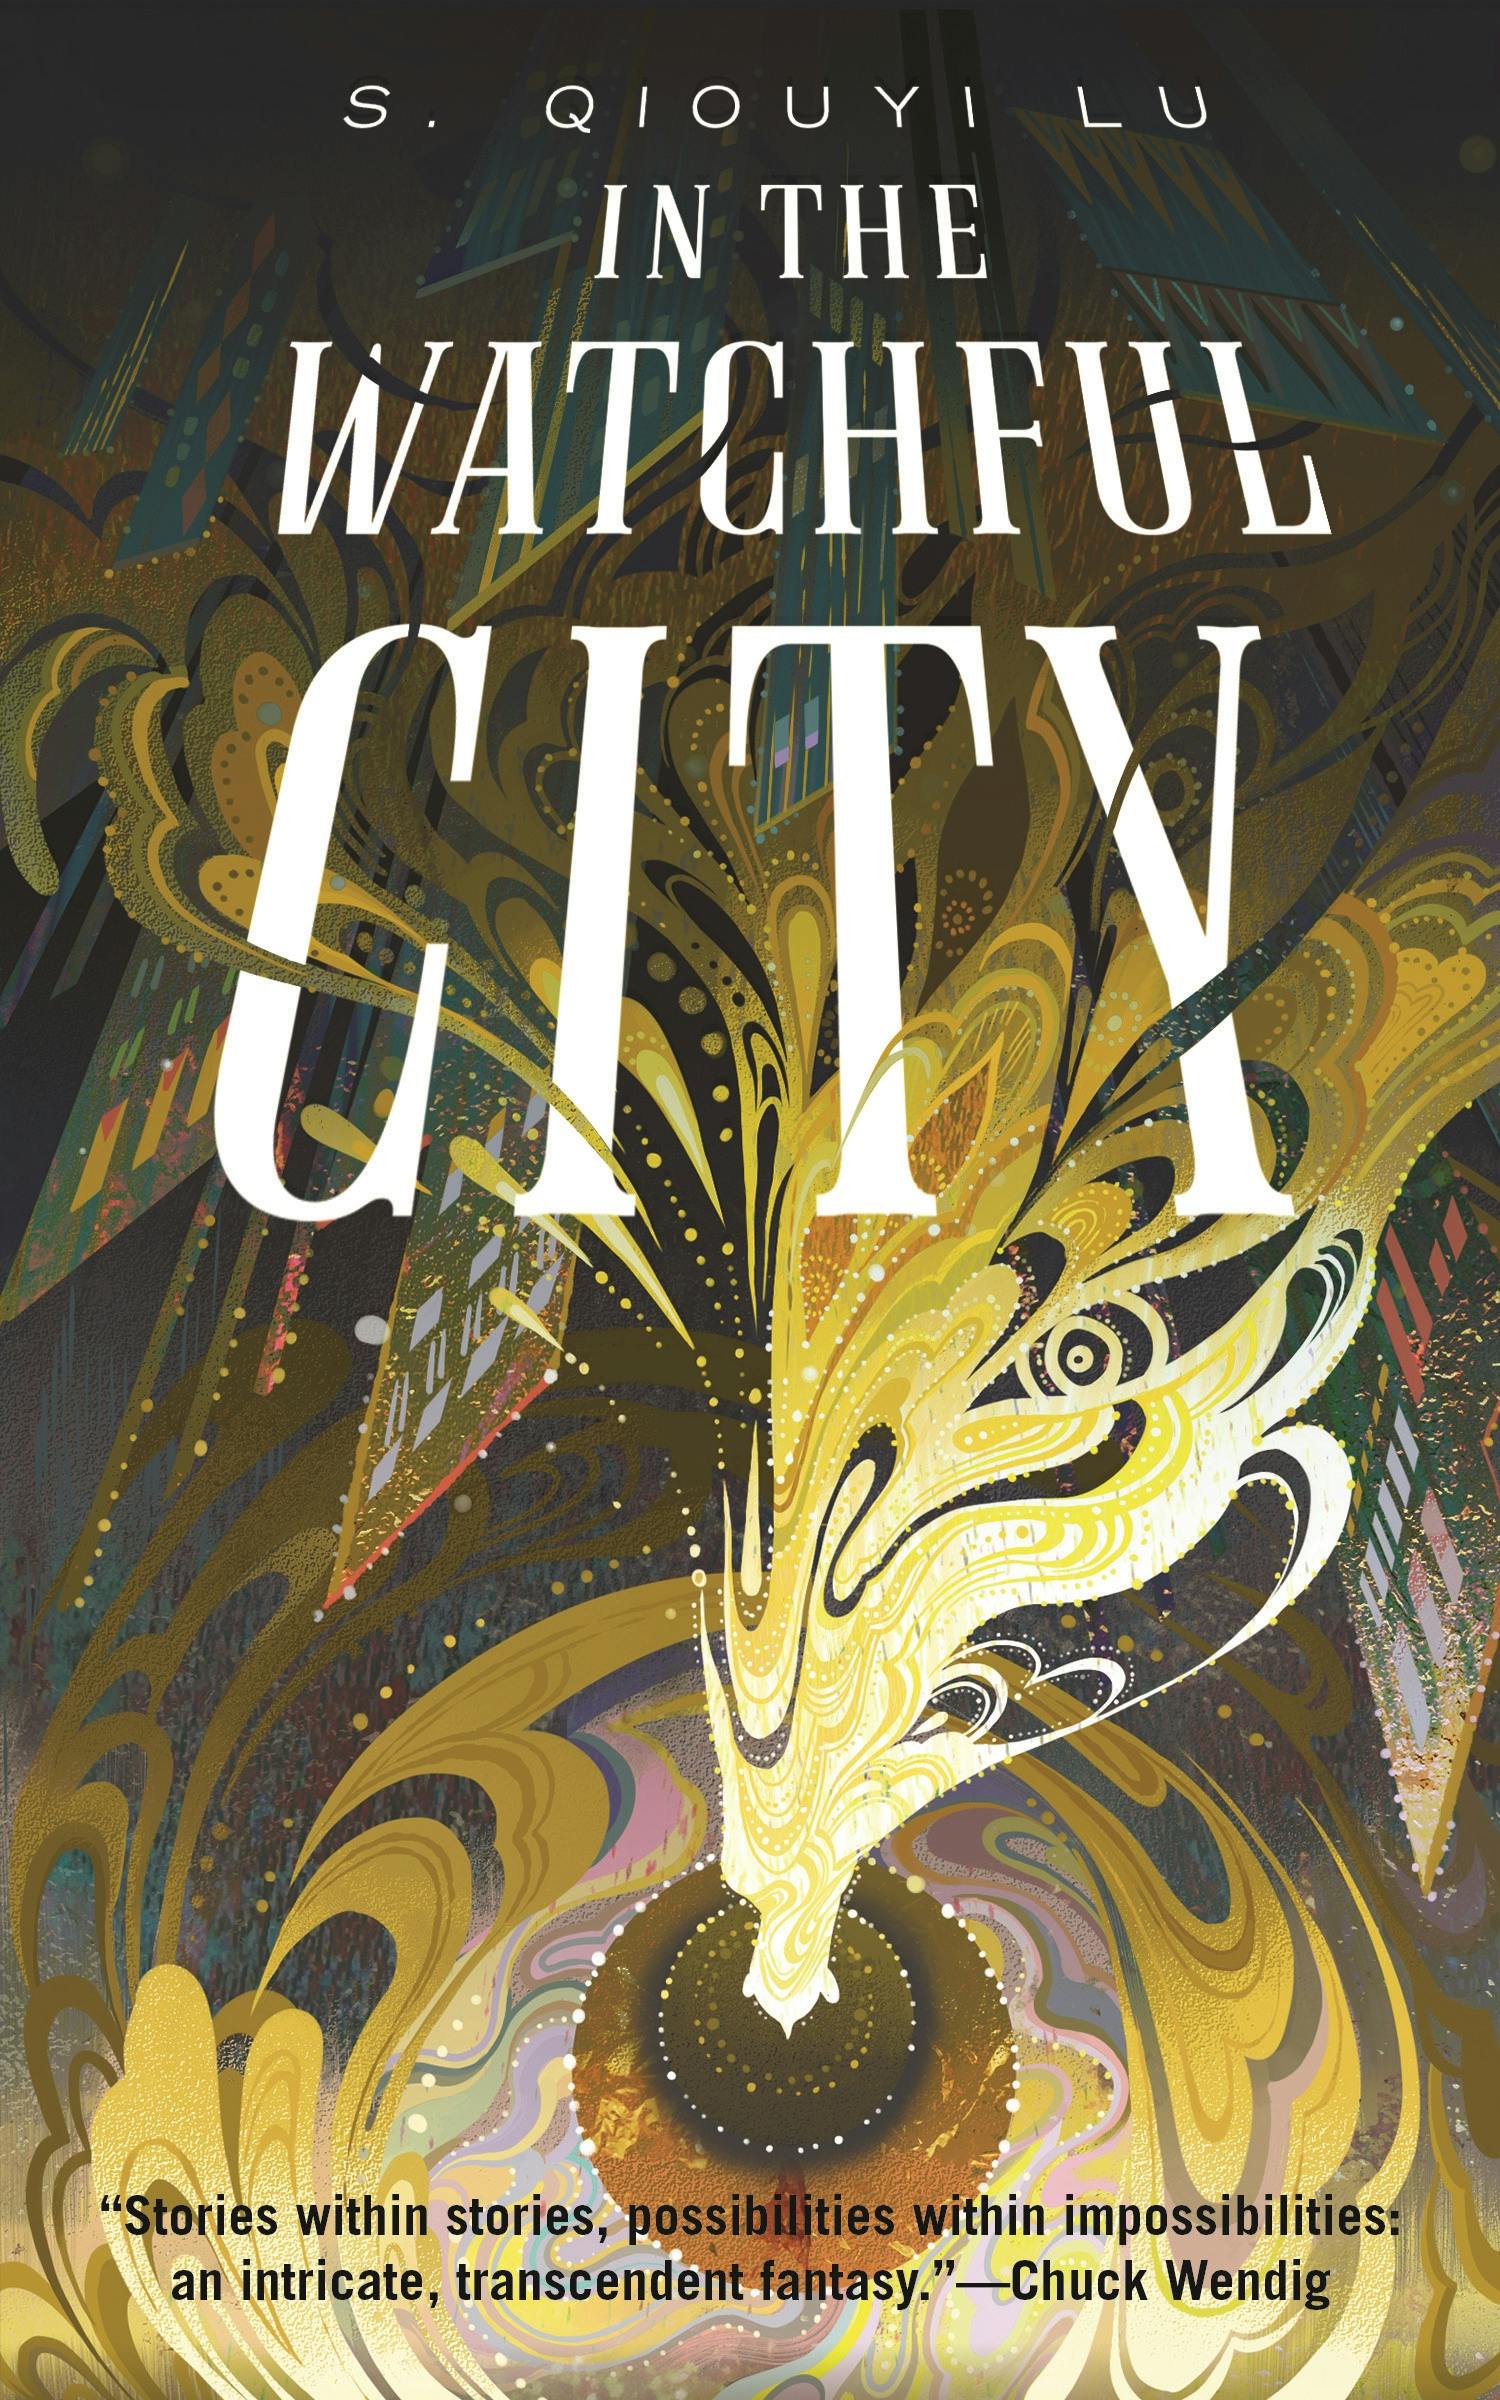 Cover for the book titled as: In the Watchful City